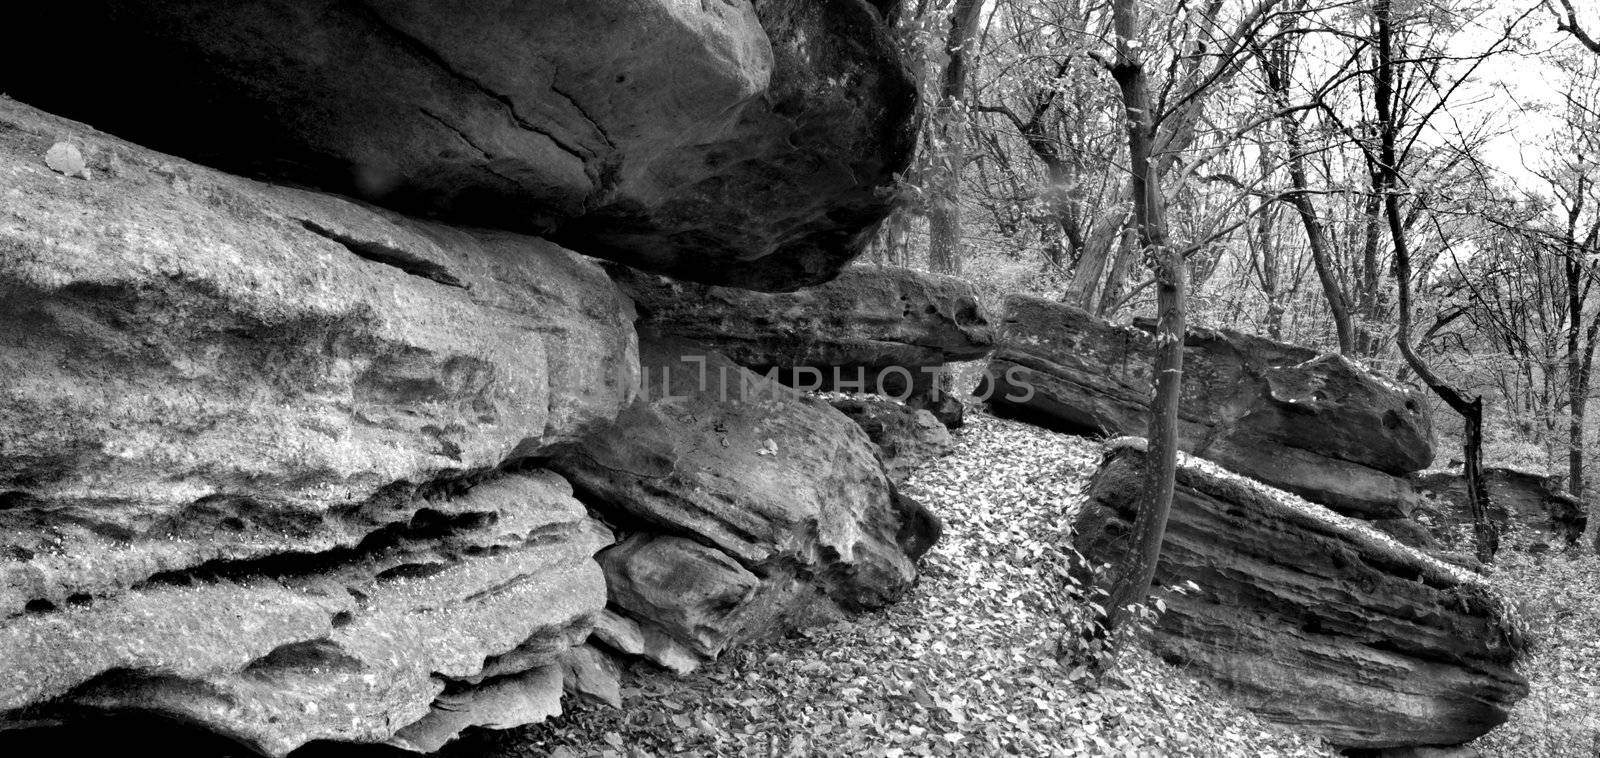 Black and white image of stones in forest